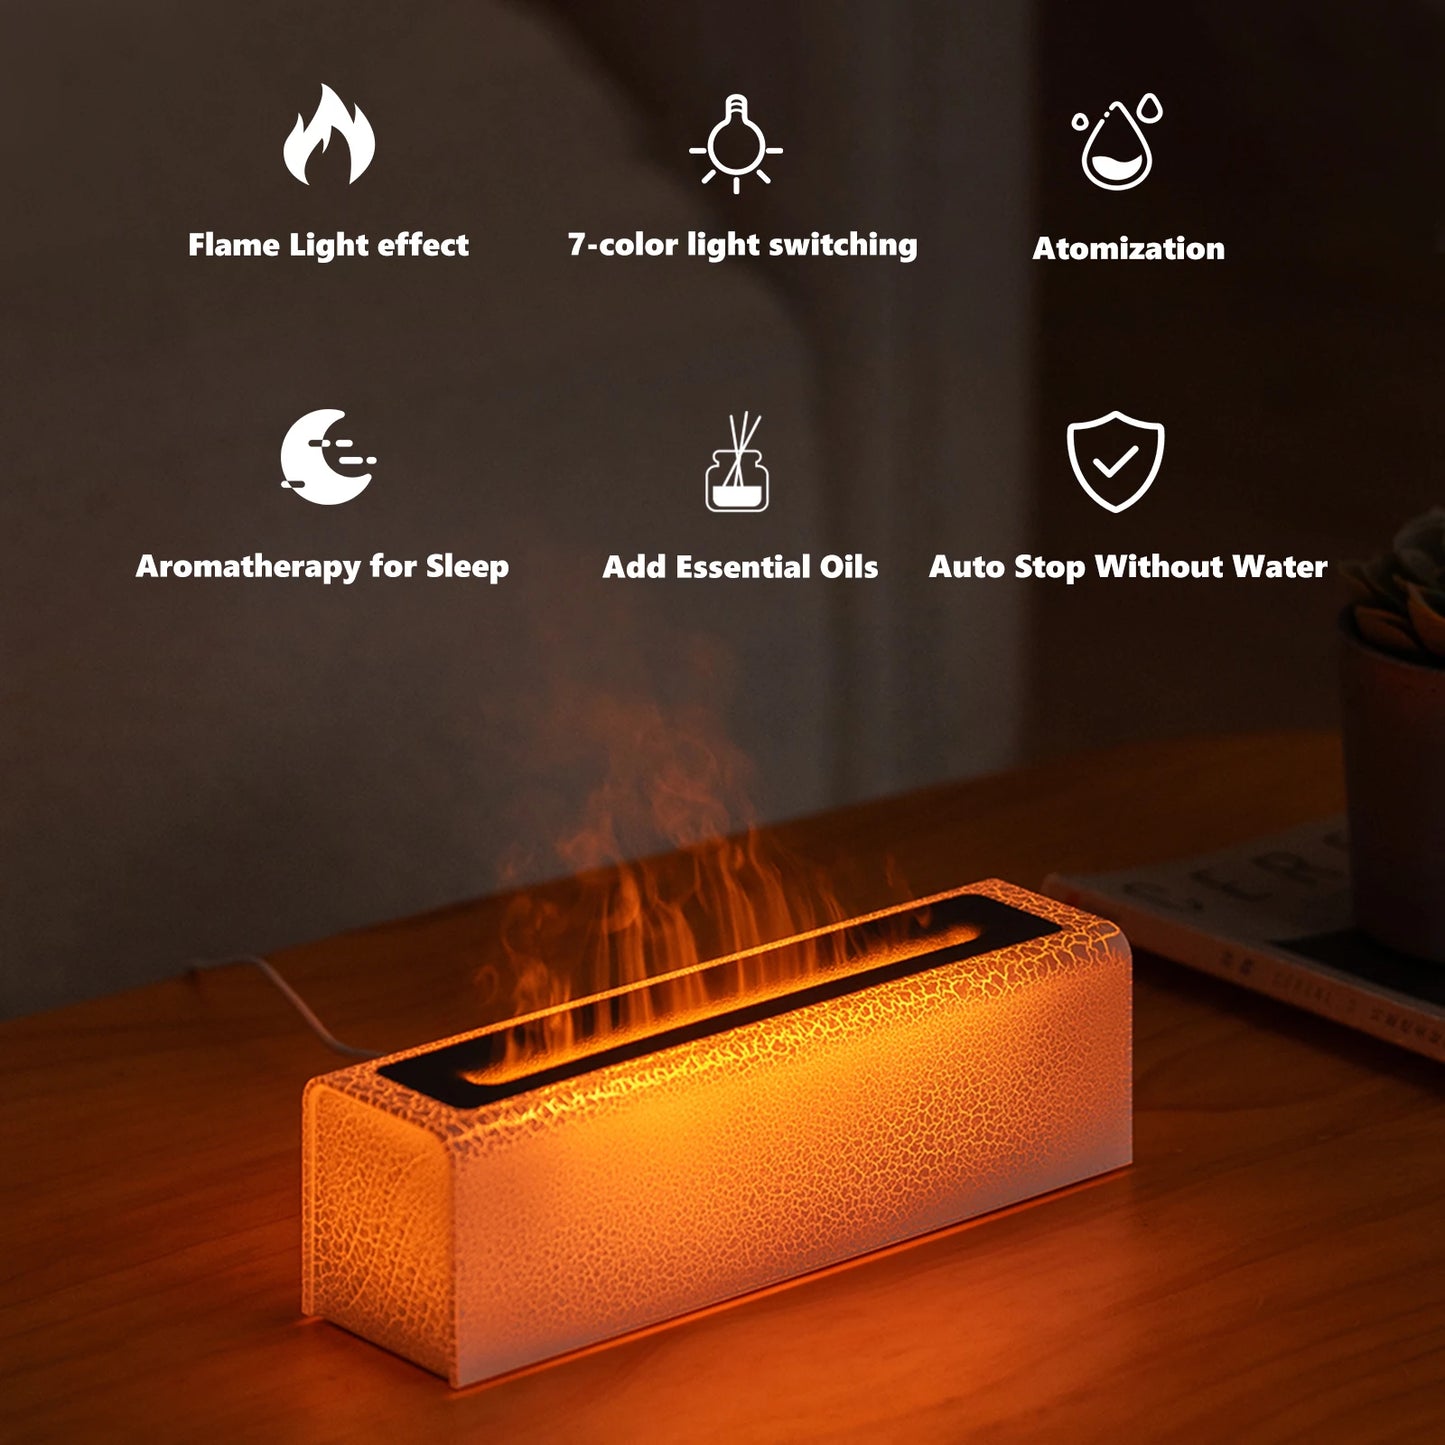 Vissko 7 Colorful Flame Diffuser 150ml USB Air Humidifier Aromatherapy Essential Oil Diffuser Fragrance diffuser For Bedroom